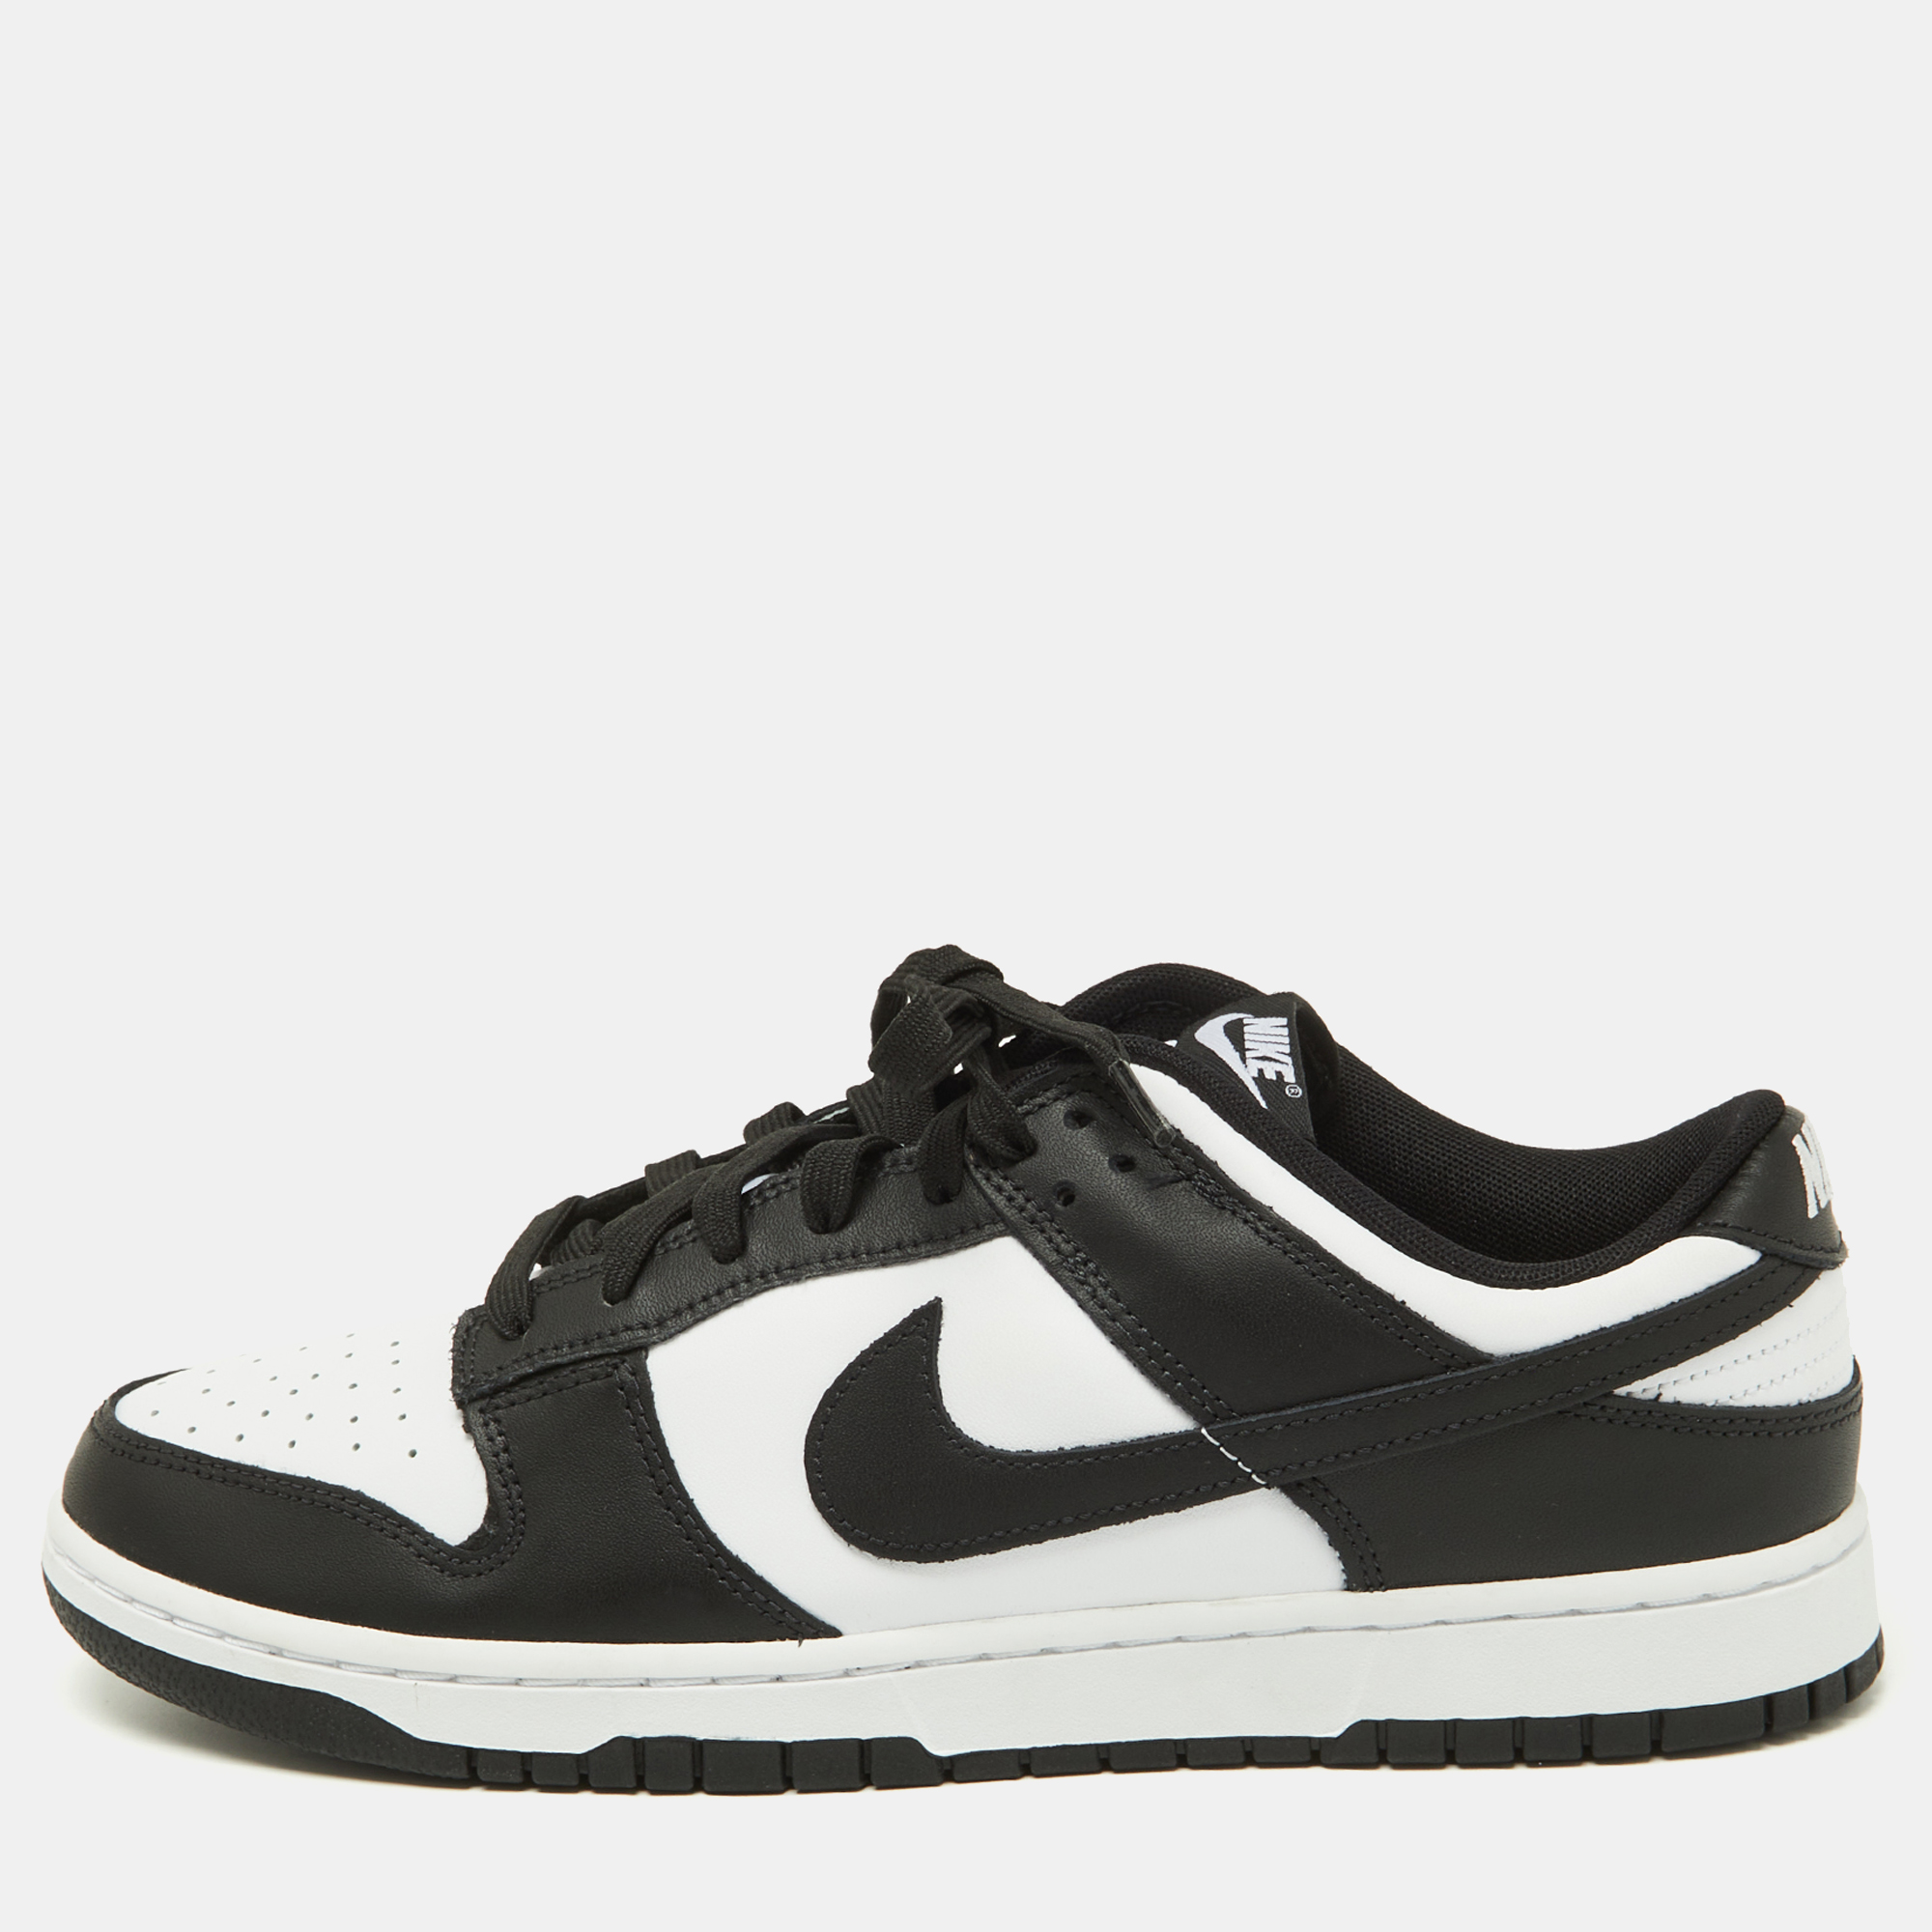 

Nike Black/White Leather Dunk Low Top Sneakers Size